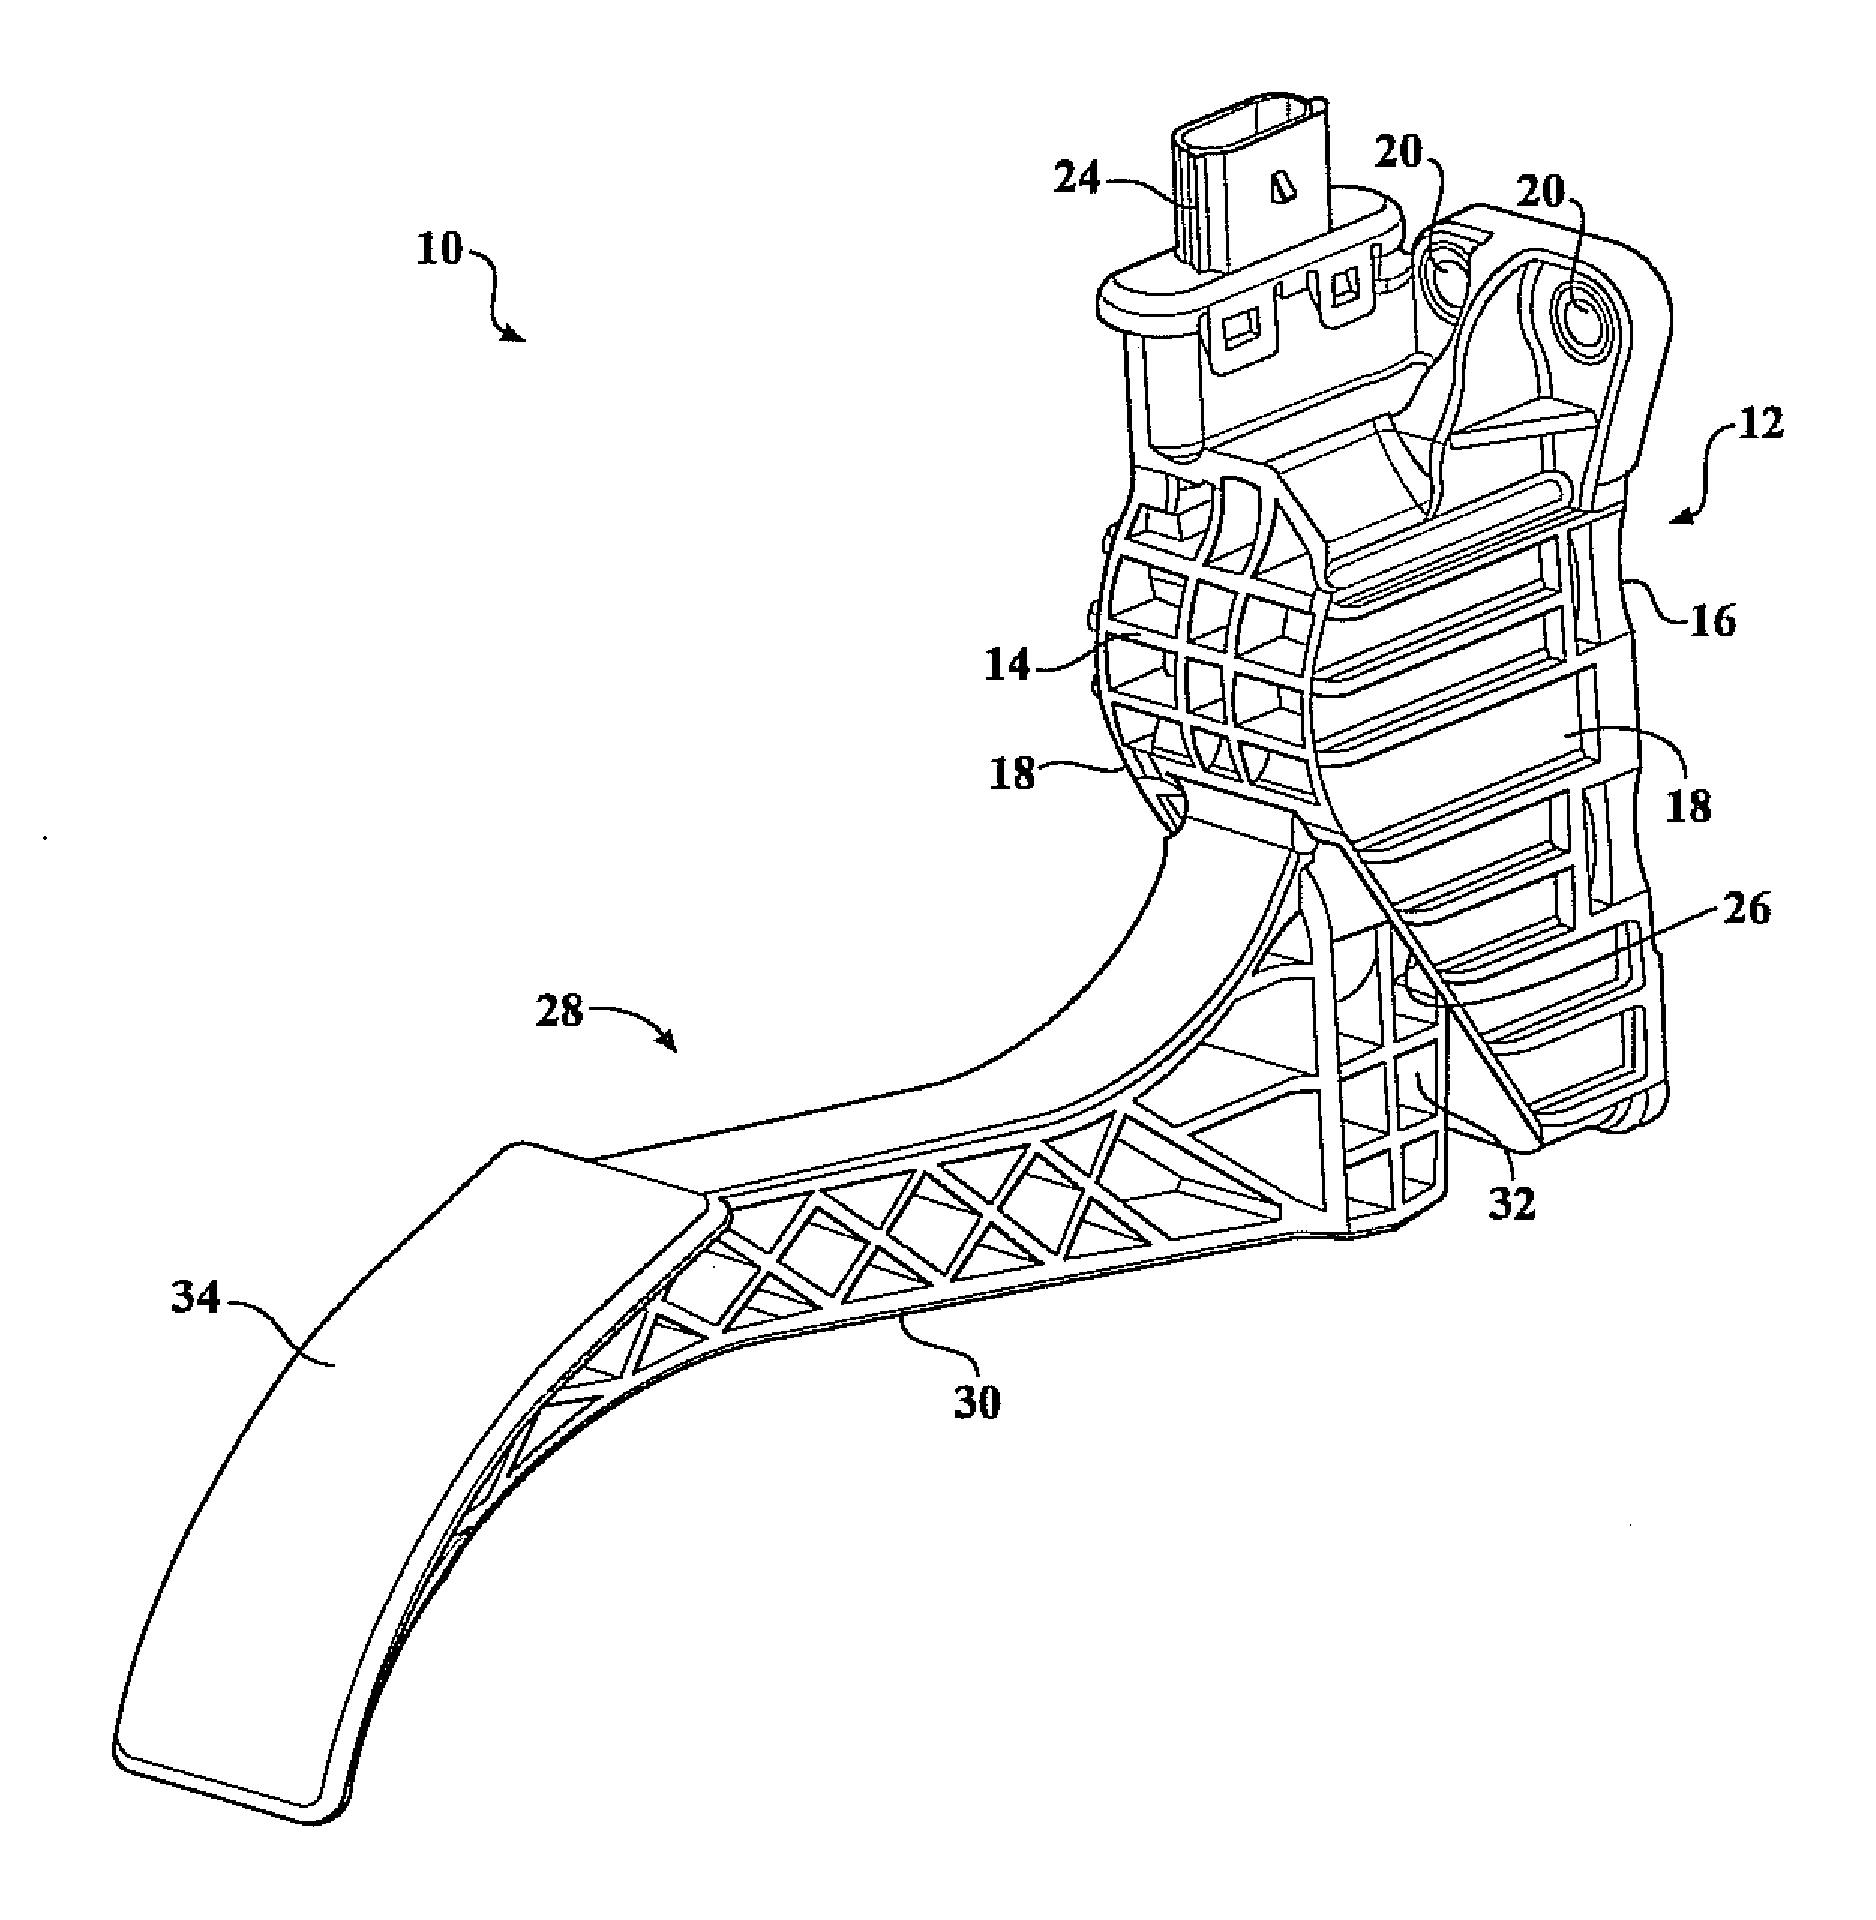 Electronic throttle control pedal assembly with hysteresis